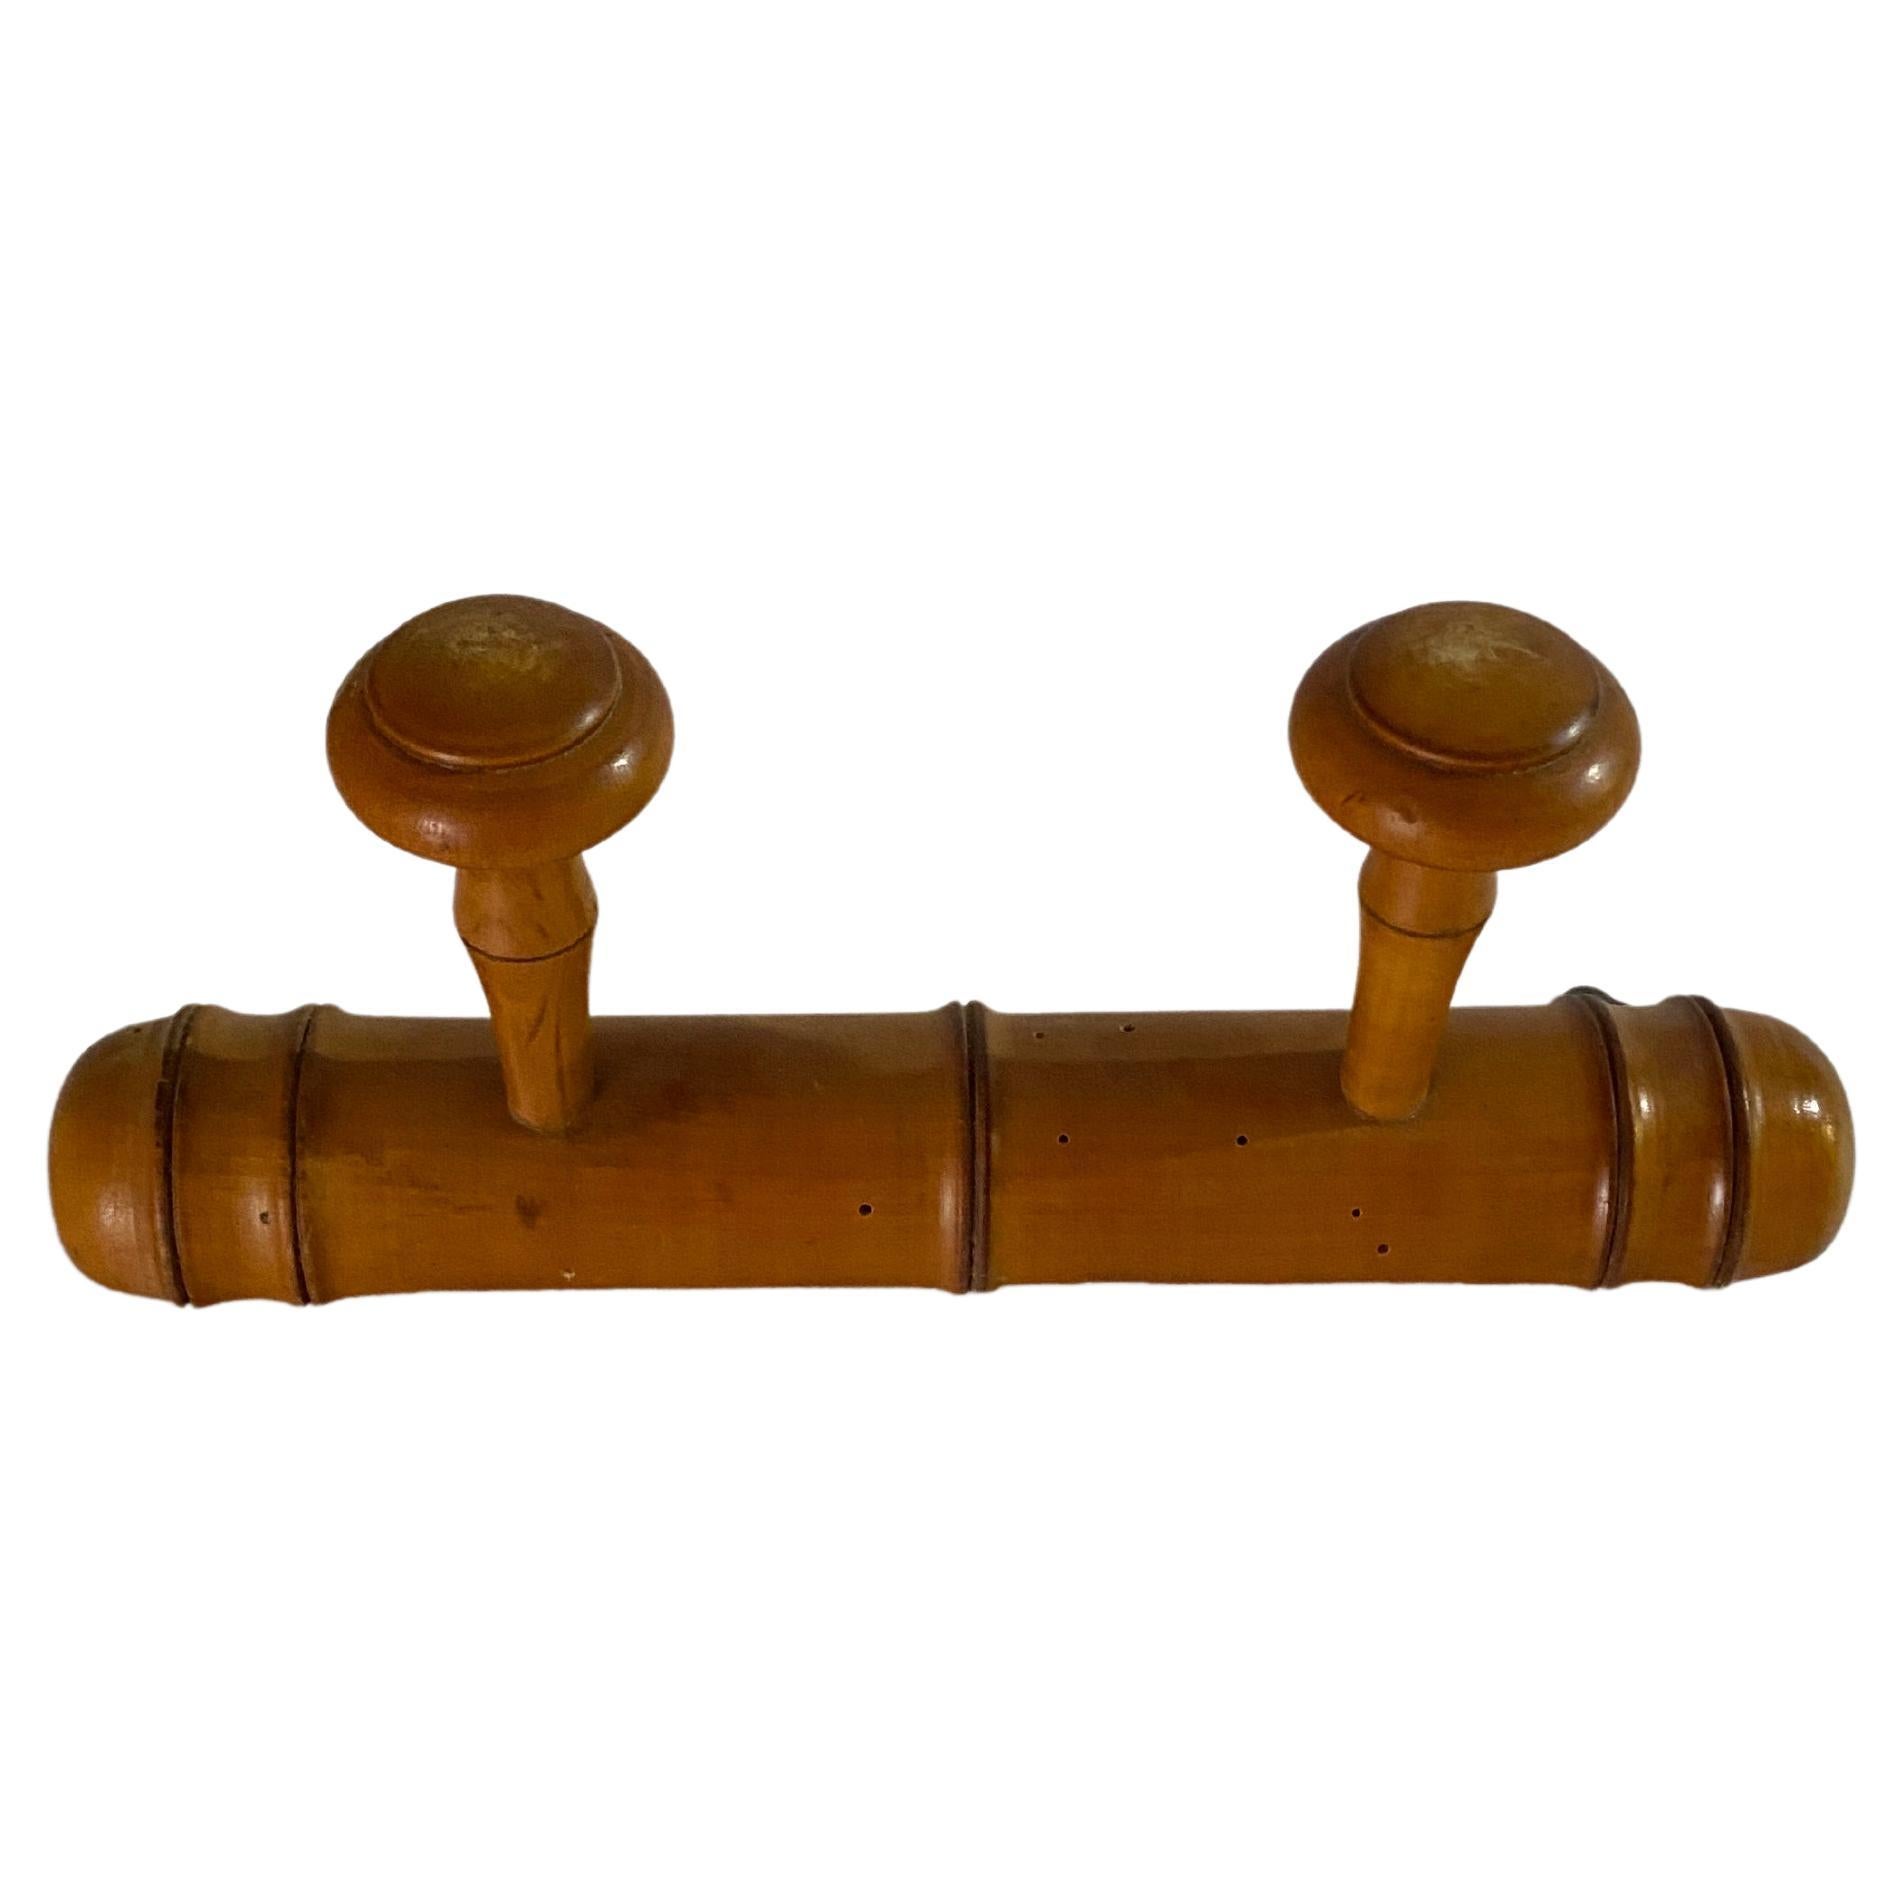 Antique French Faux Bamboo Carved Coat & Hat Rack, circa 1920 For Sale